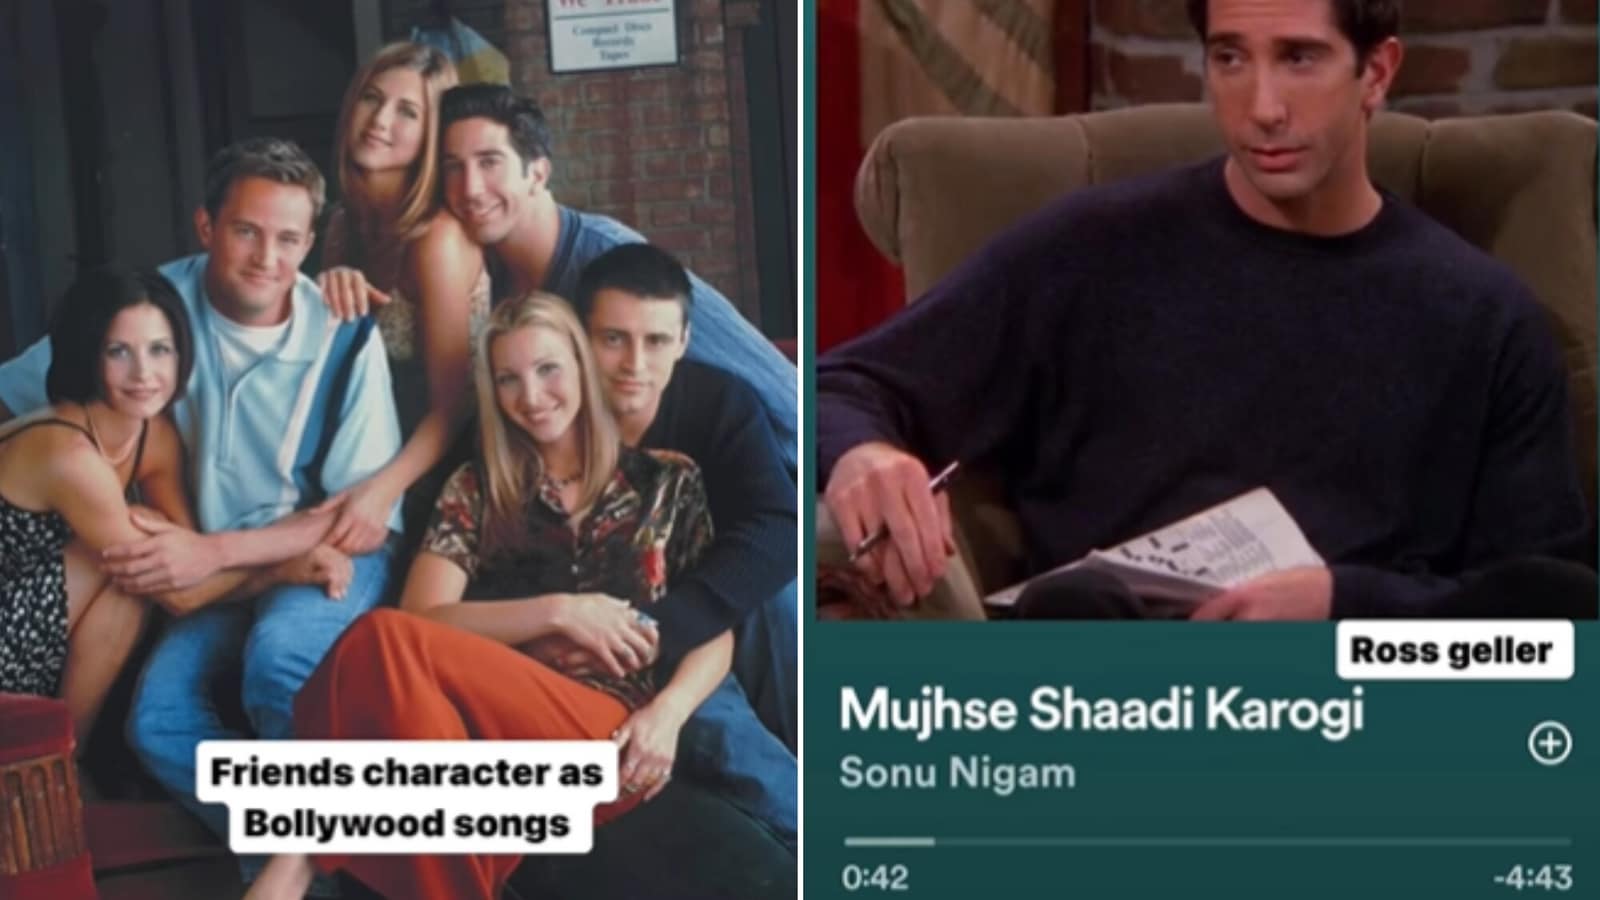 Artist imagines characters from Friends as Bollywood Songs. The result is spot-on